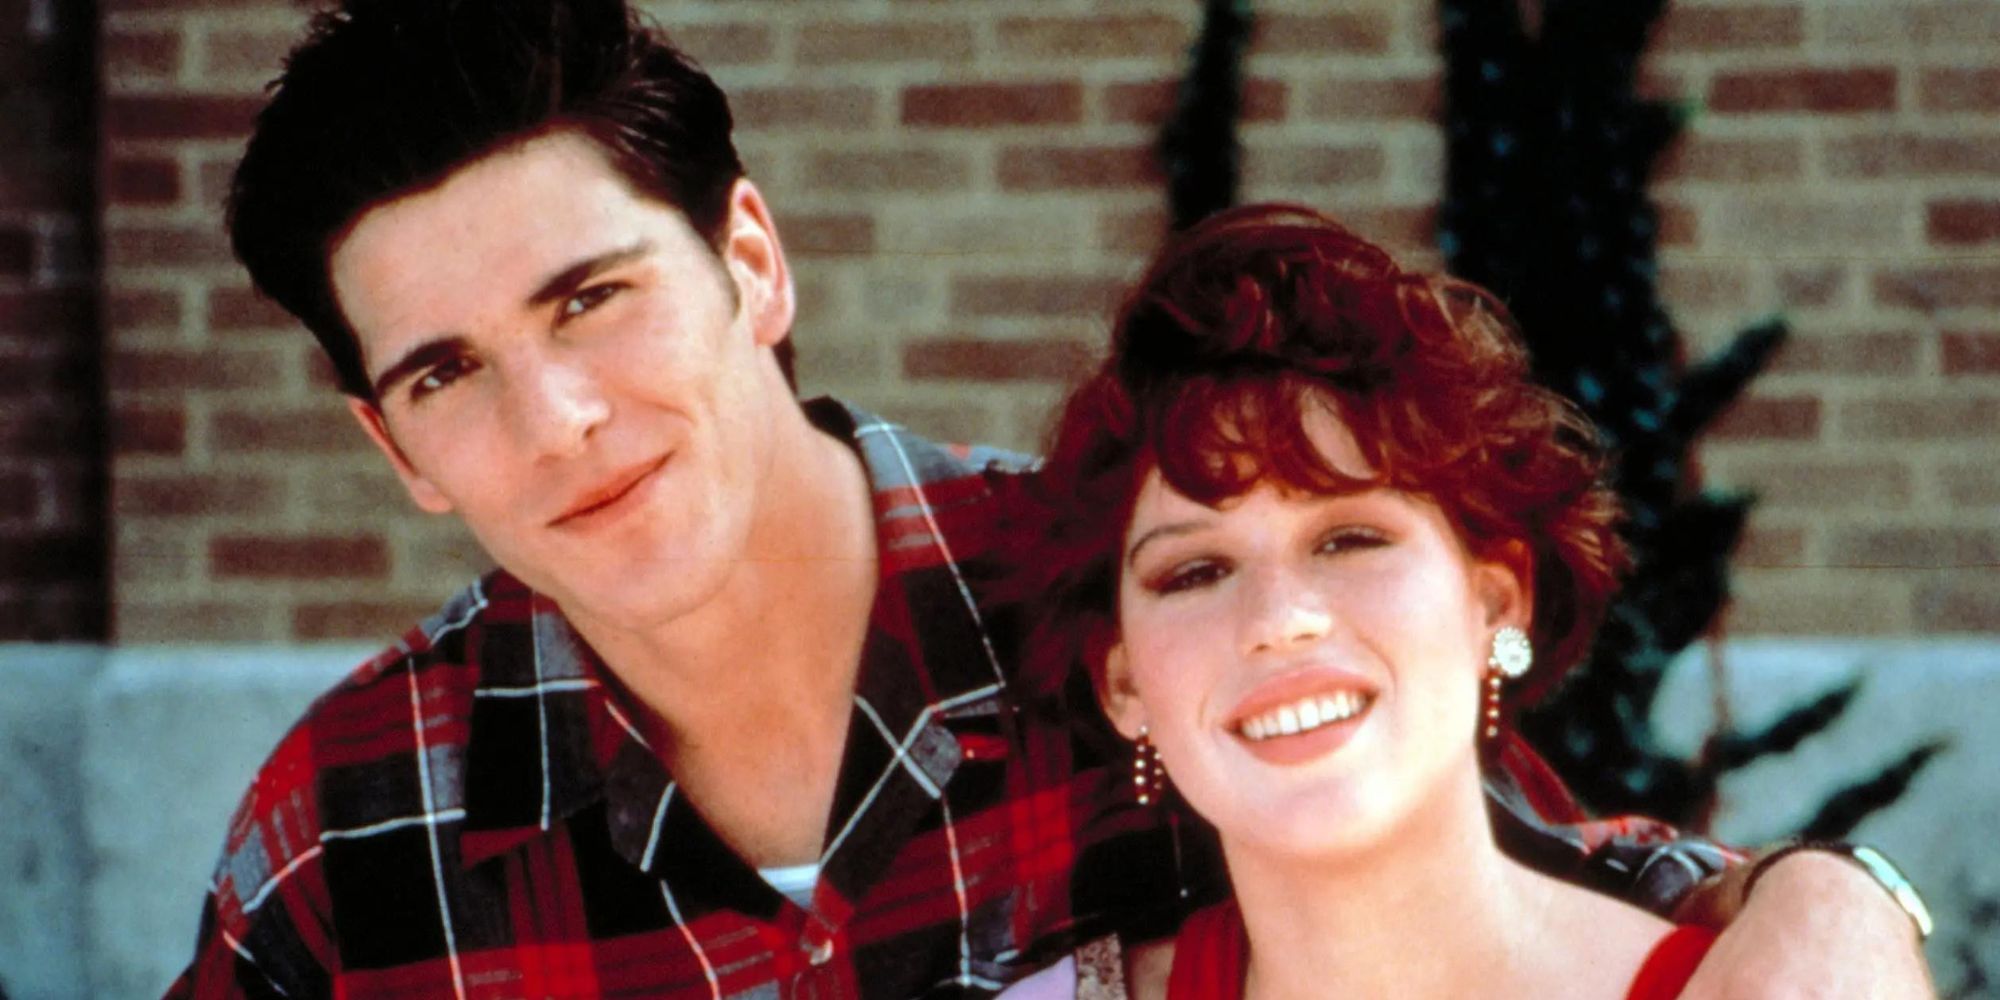 Jake and Sam from 16 Candles standing cozily